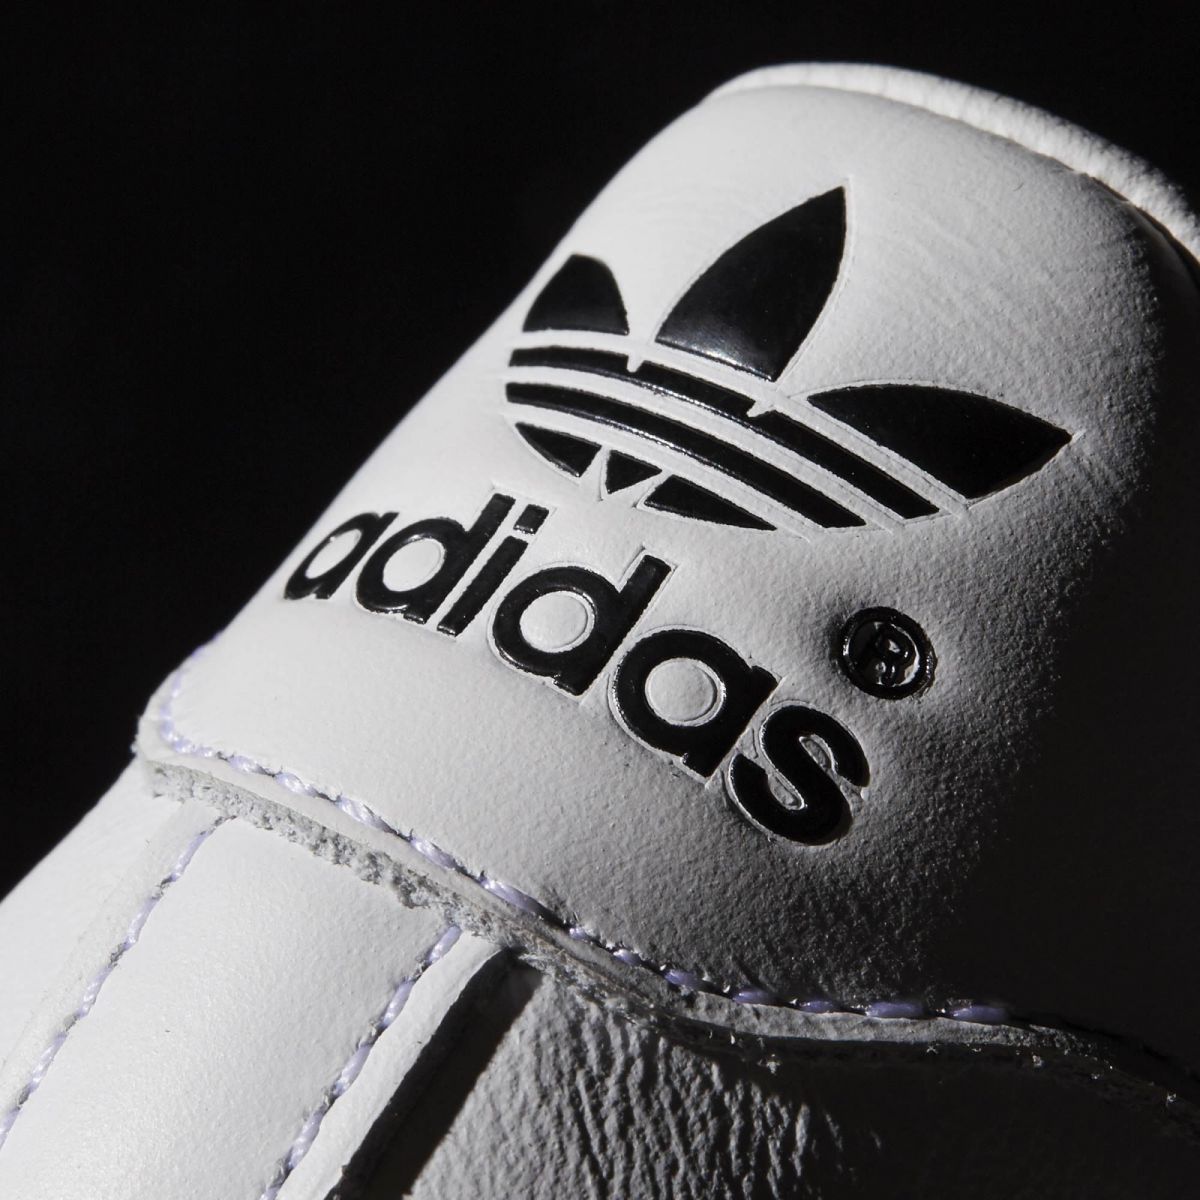 Jeremy Scott Gets in on adidas Superstar Collabs | Sole Collector